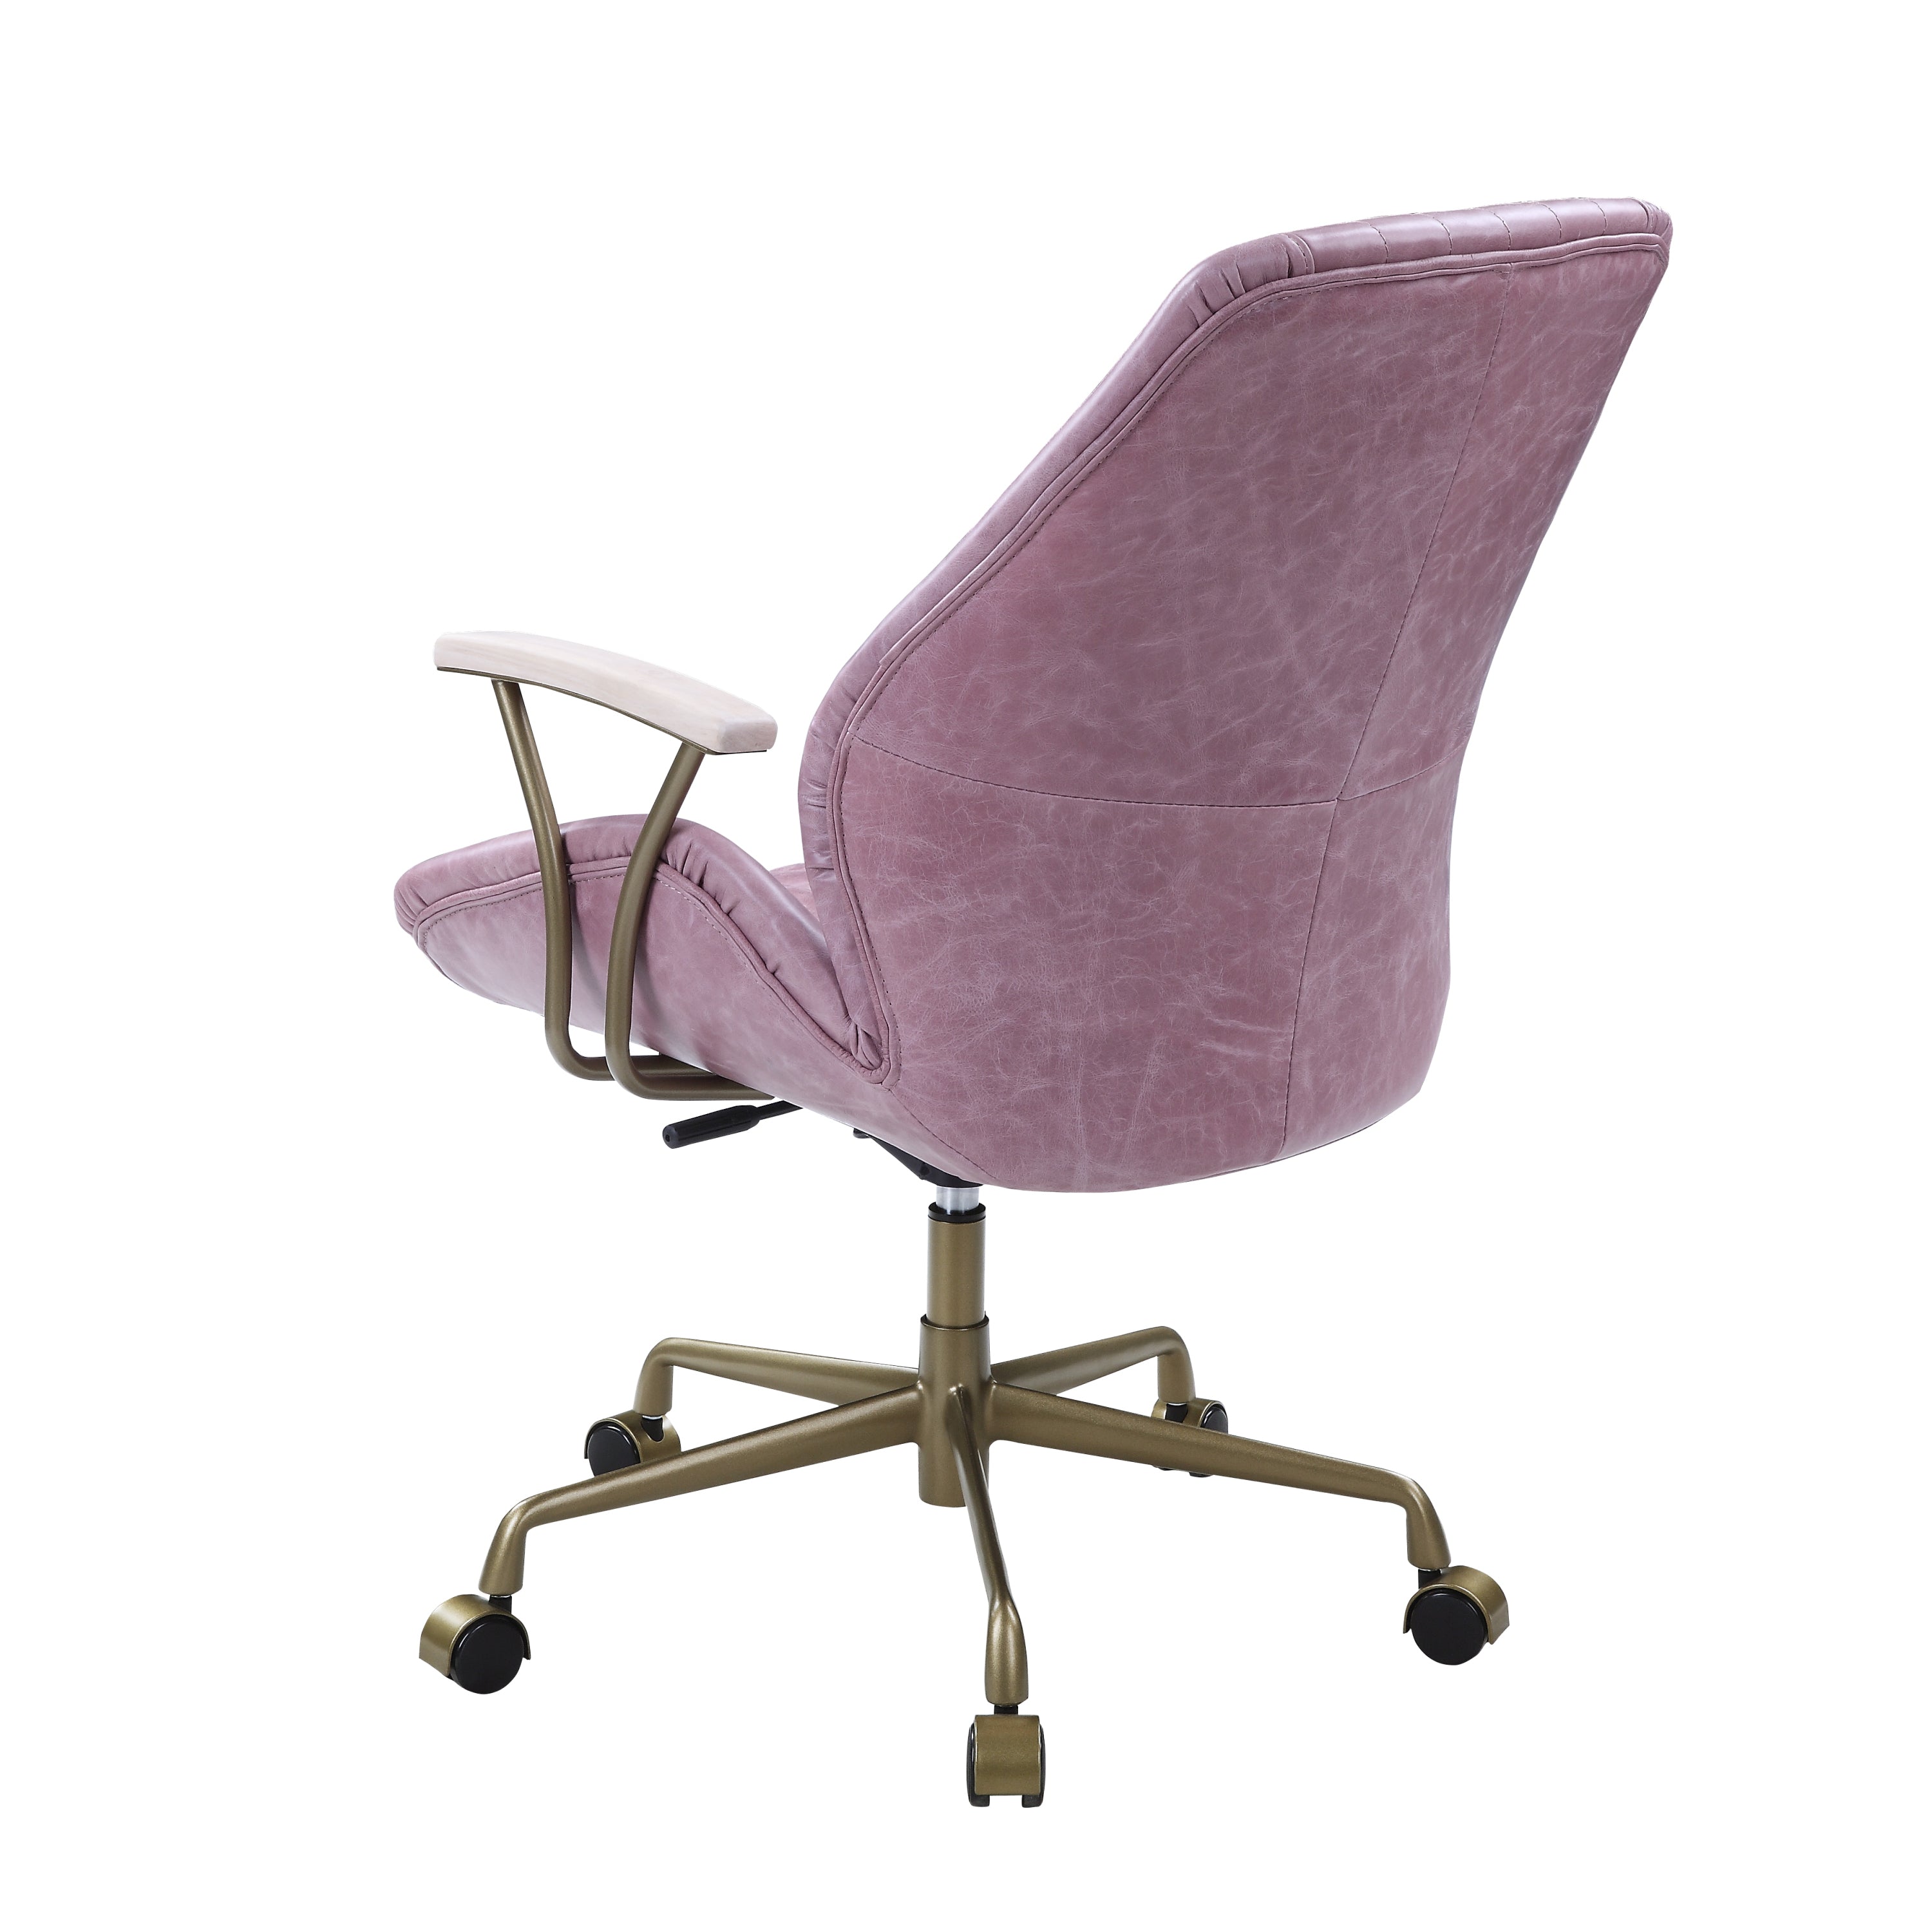 Vintage Office Chair, Top Grain Leather - Pink